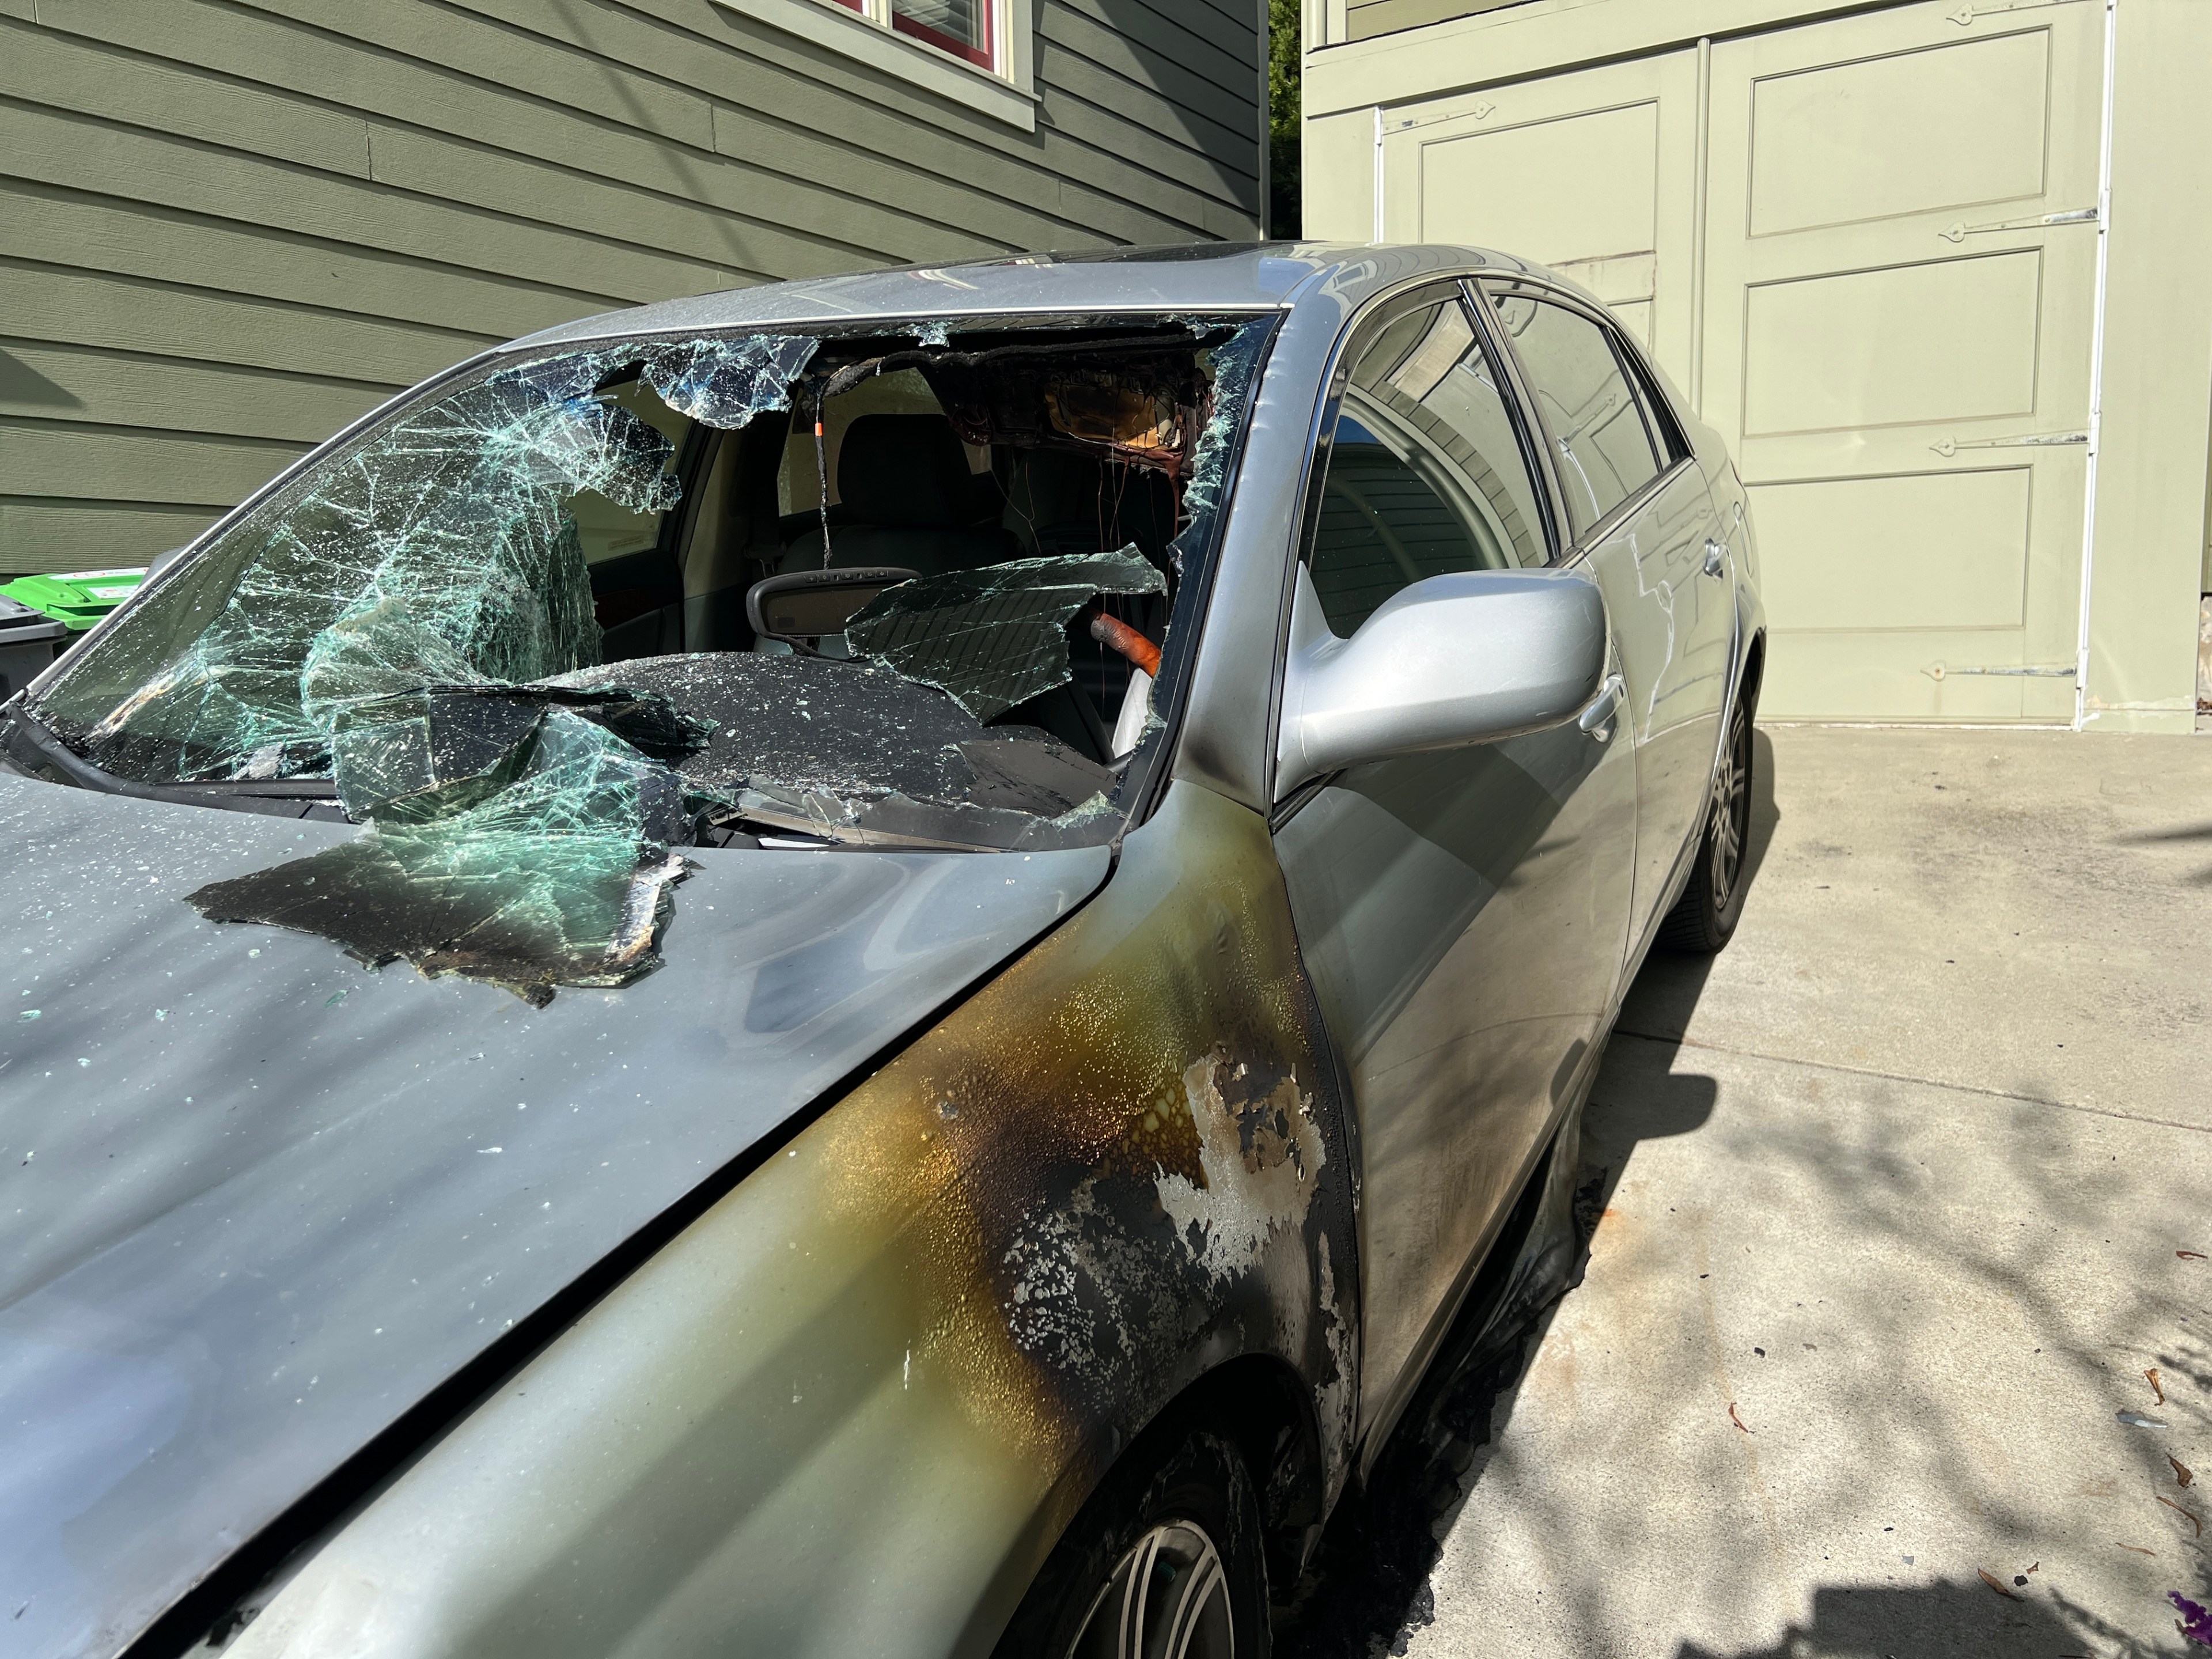 A gray car has a shattered windshield and a burned up side.